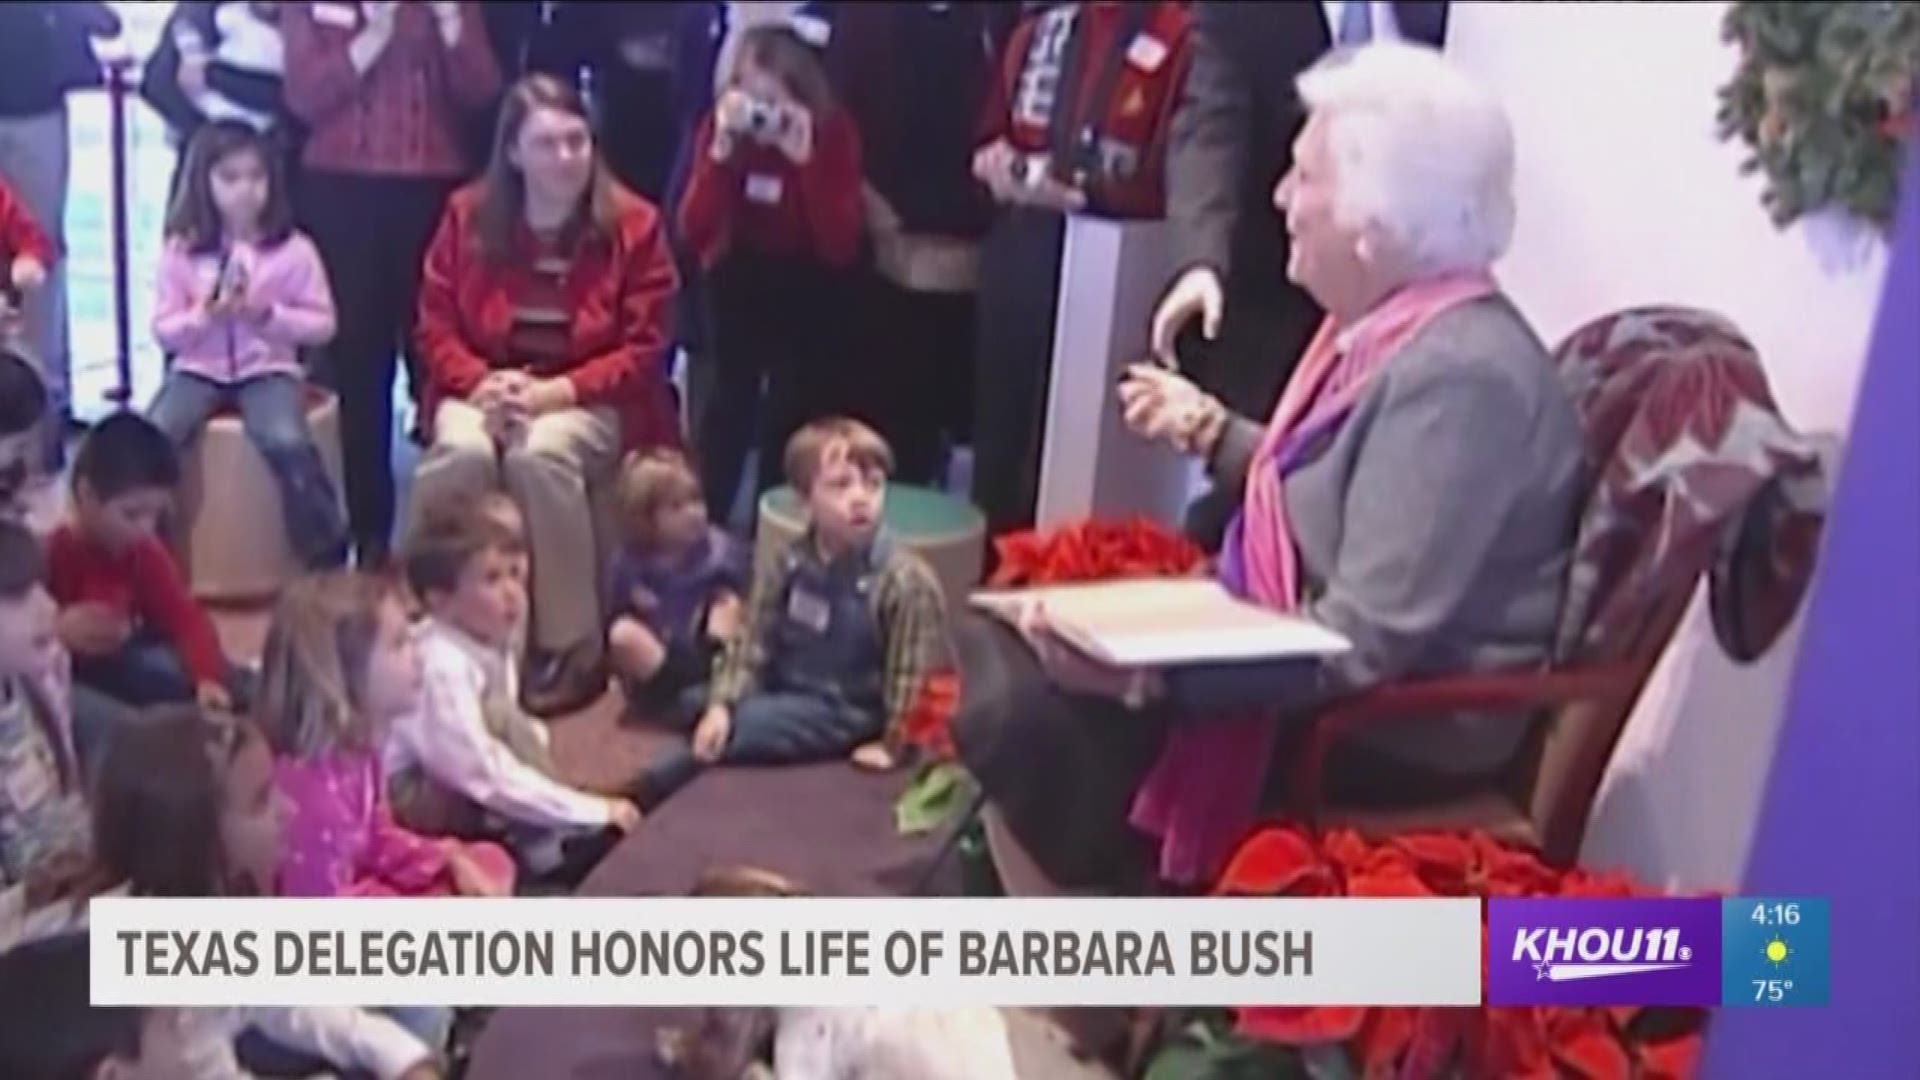 The entire Texas Congress introducing a resolution Thursday to recognize former first lady Barbara Bush's contribution to the nation.